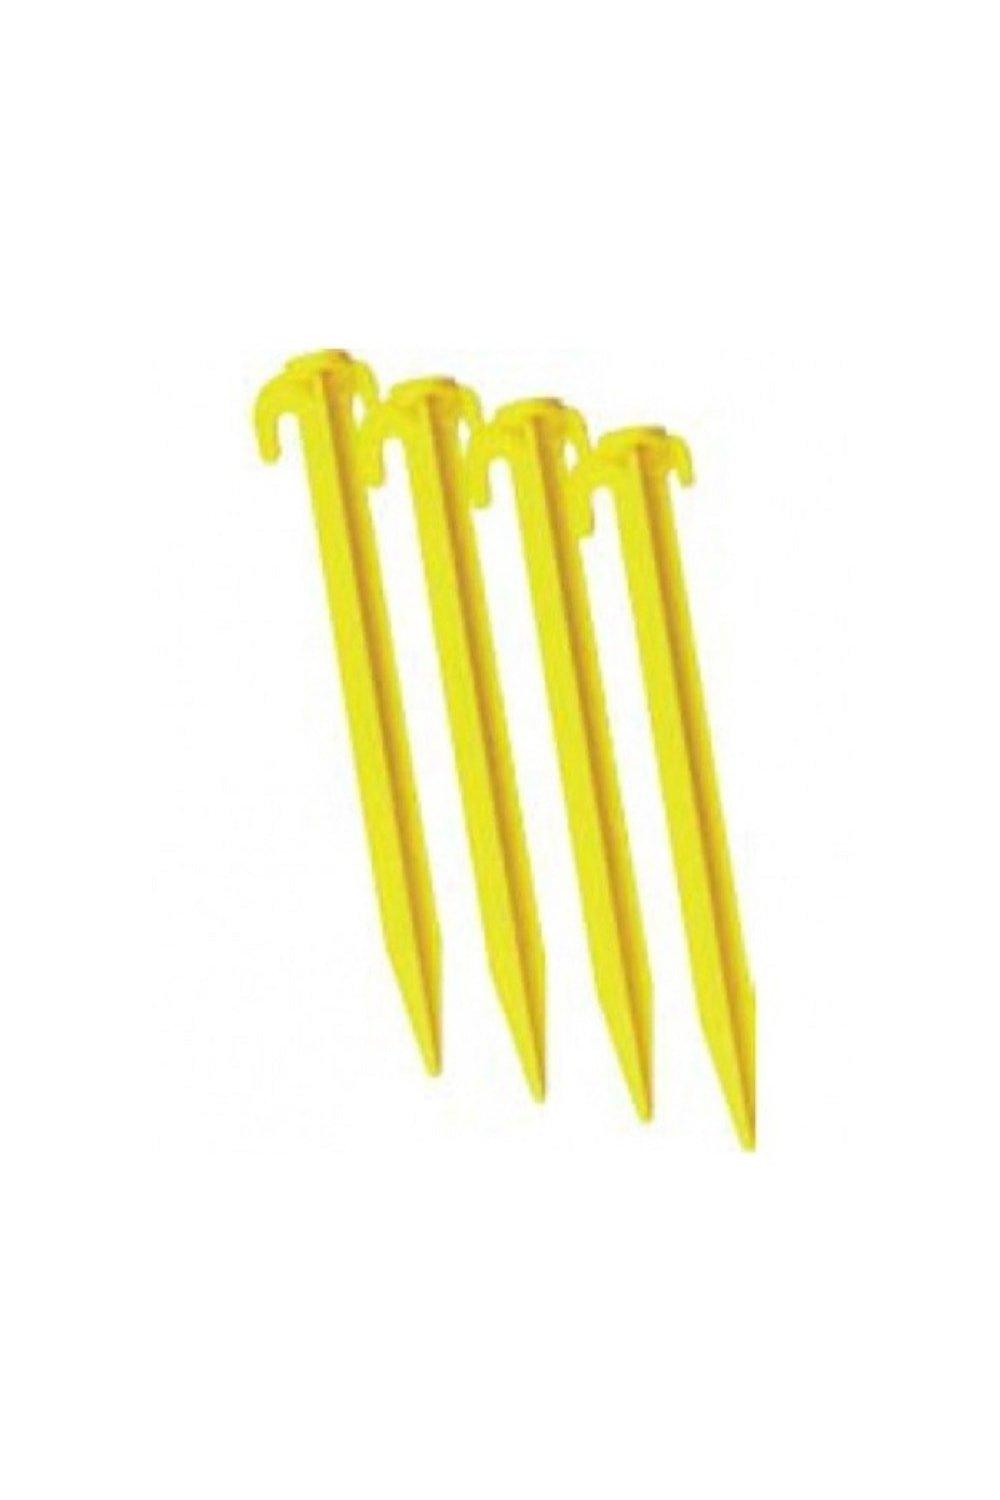 Plastic Ground Pegs (Pack of 10)